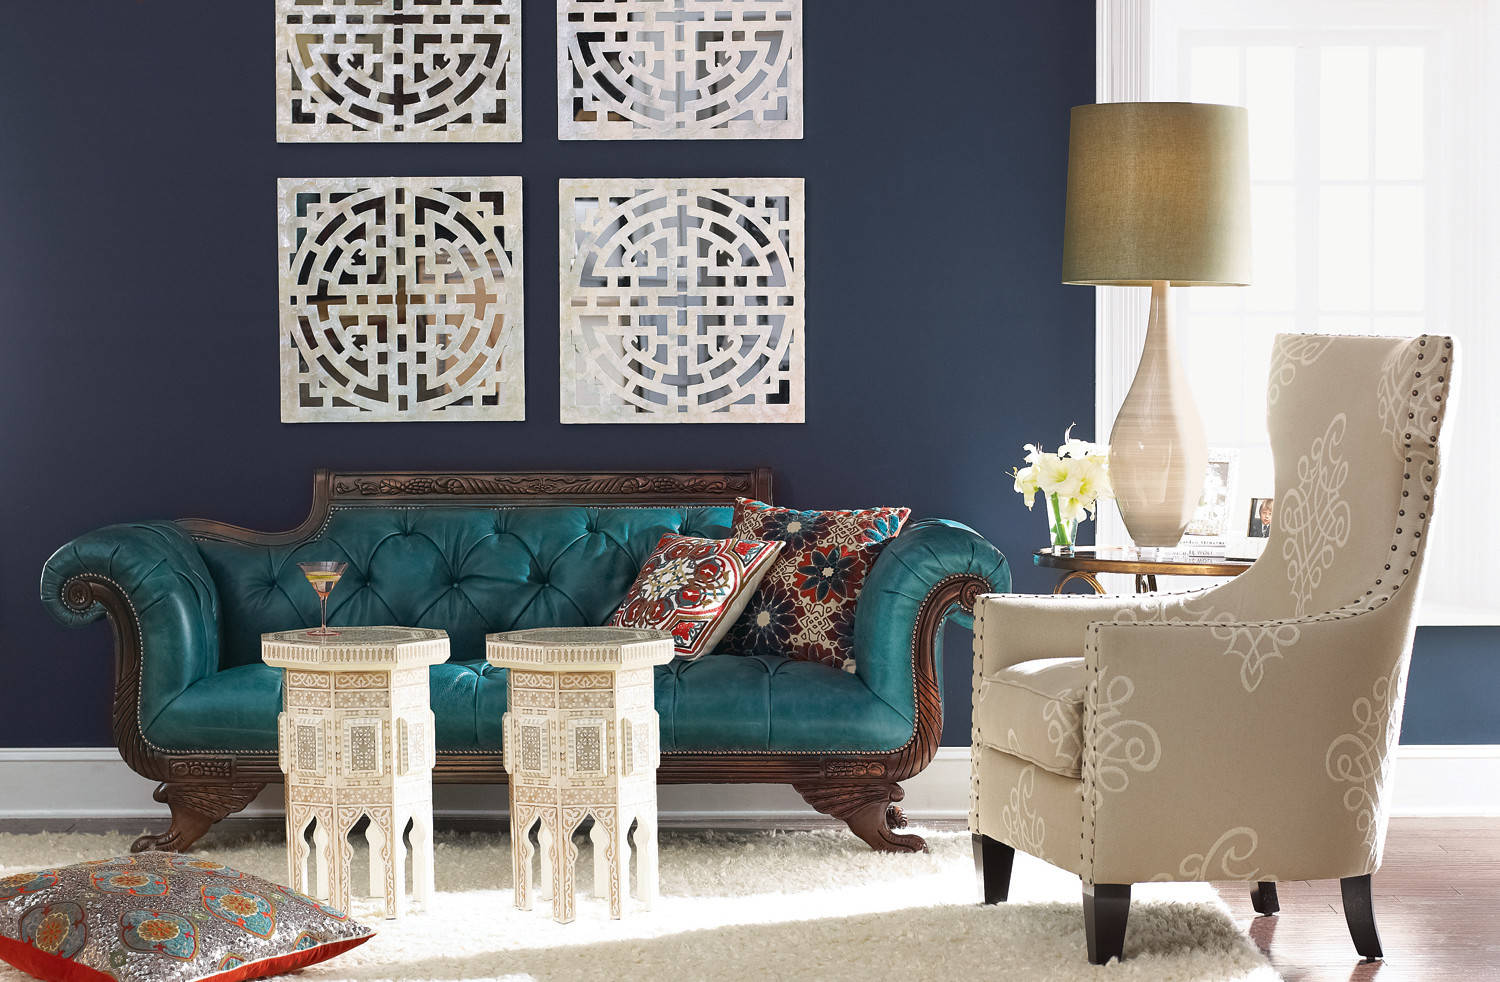 How To Decorate With Teal Houzz Uk, Teal Living Rooms Uk